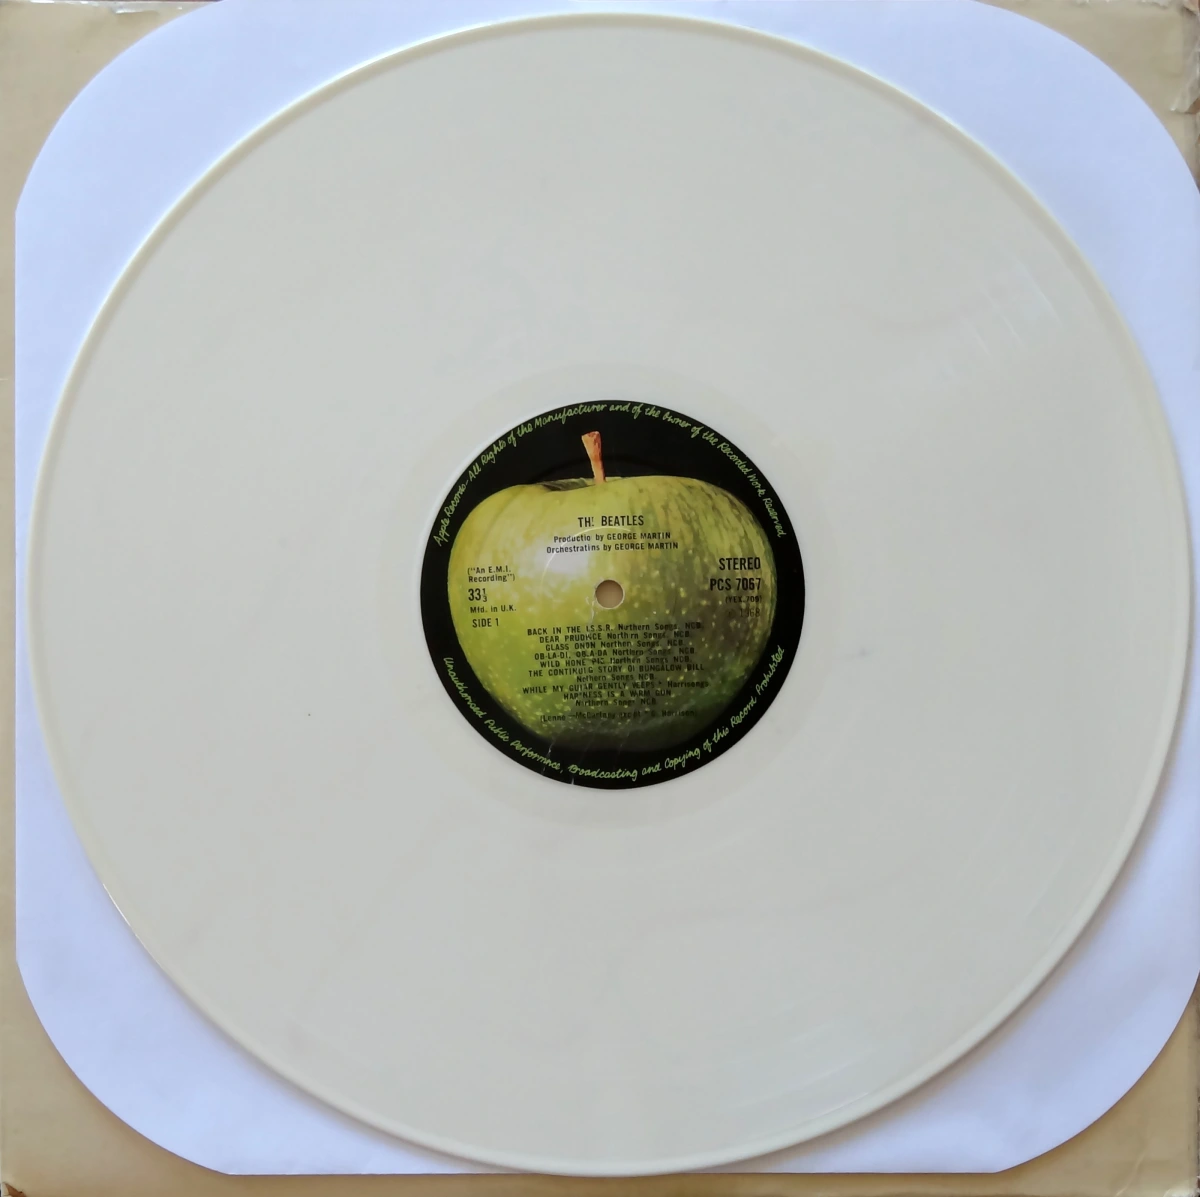 From The Stacks: The Beatles, 'White Album' (White Vinyl) – Why It Matters